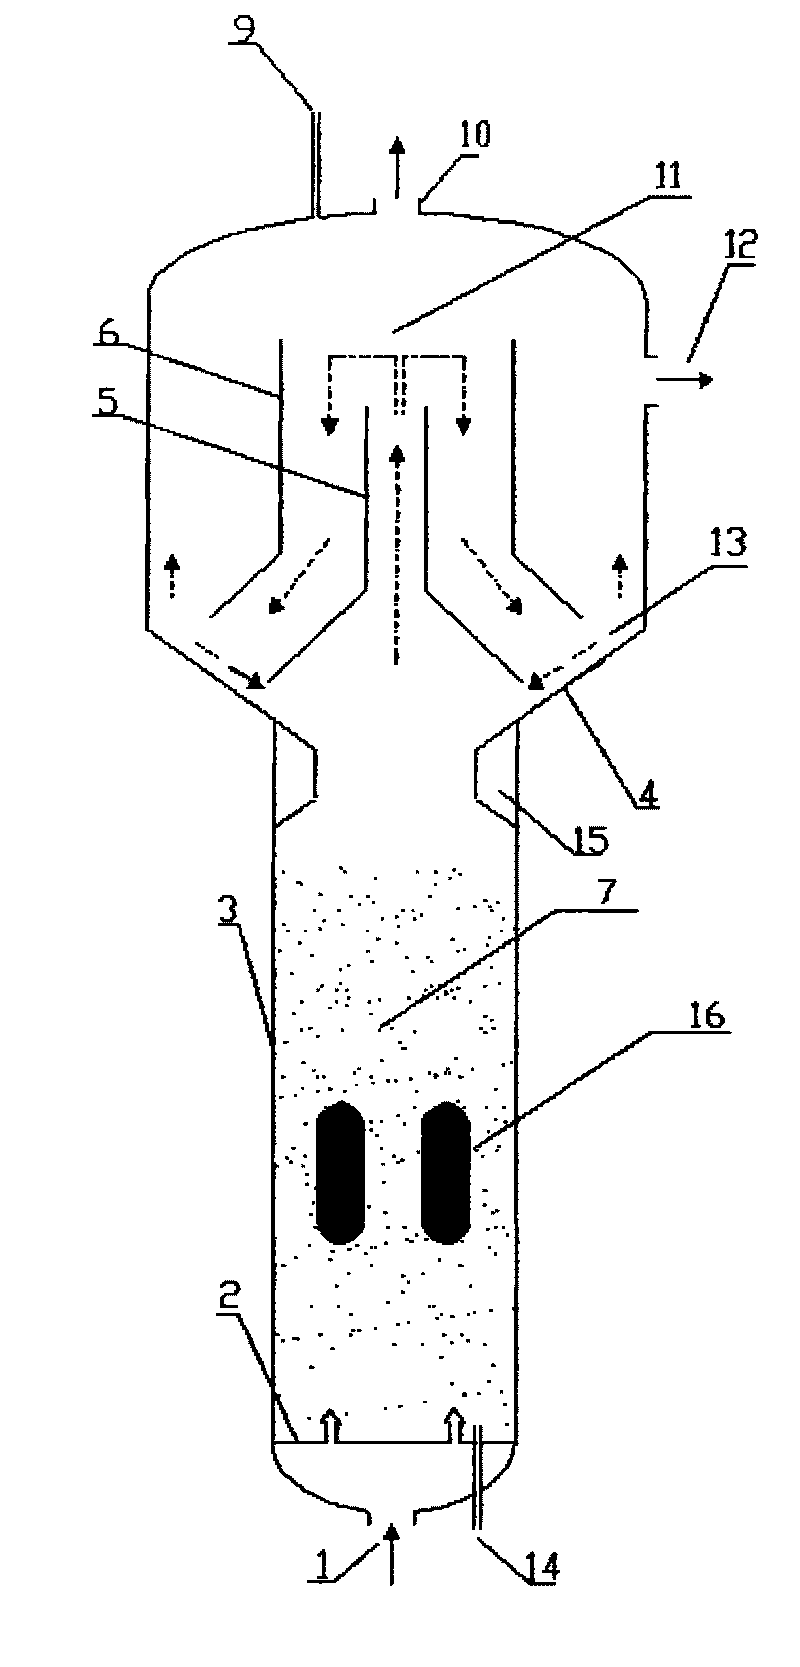 Three-phase fluidized bed reactor